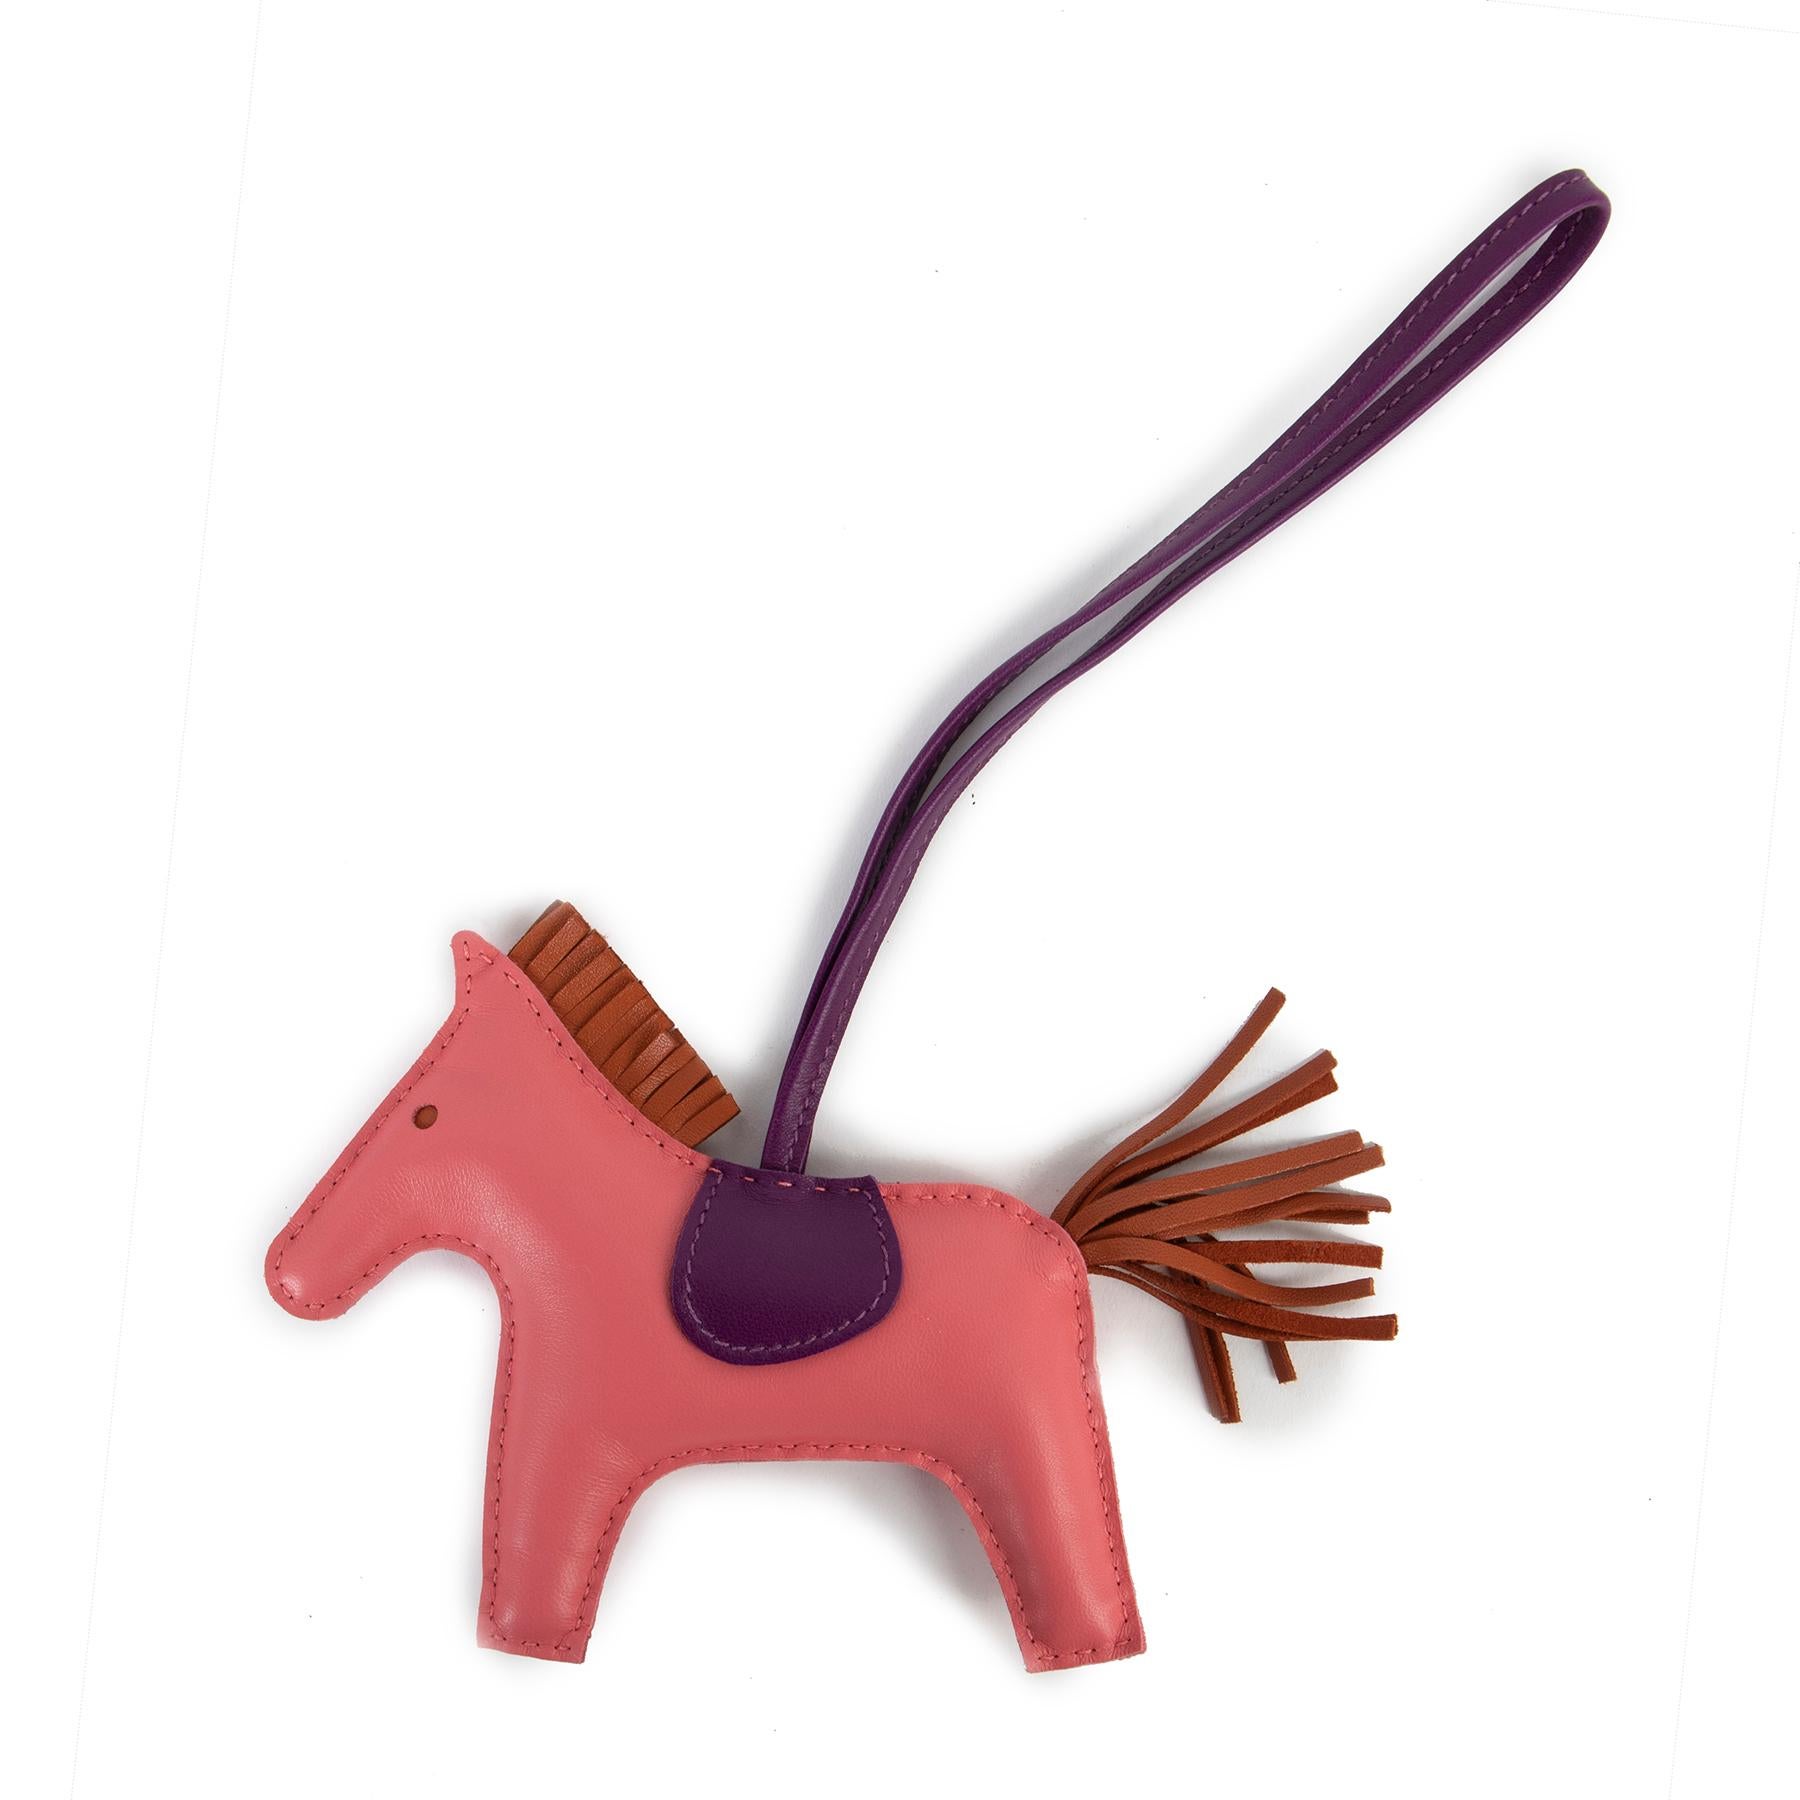 Hermès Rodeo MM Rose Azalee/Malta Blue/Cornelian Bag Charm

A lovely collector's item from Hermès, this Rodeo MM horse bag charm is perfect for pimping up any handbag. Made from soft lambskin in a combination of Rose Azalee pink, Malta Blue and